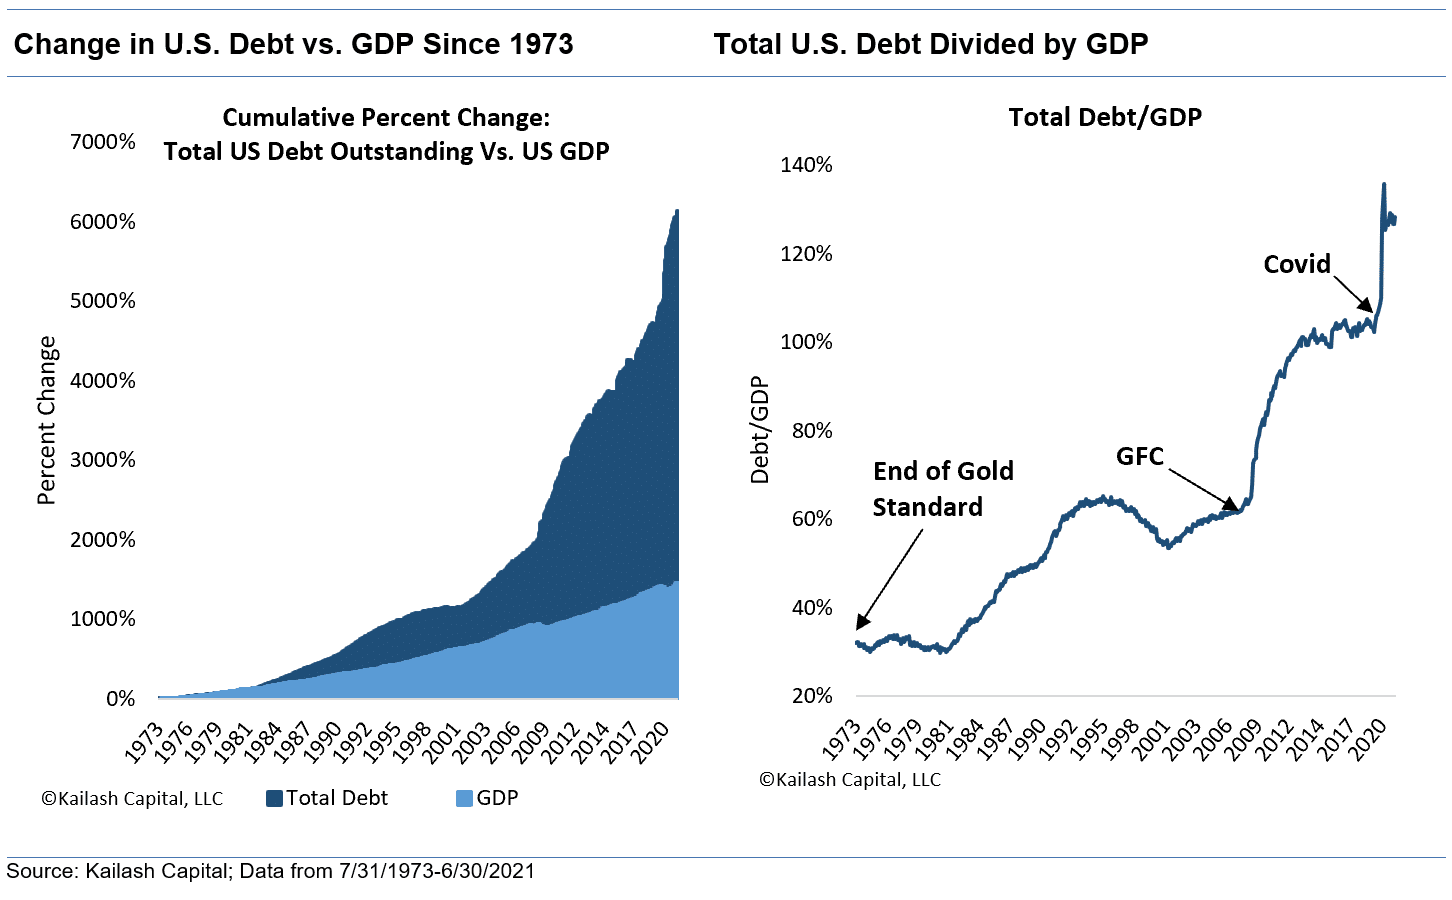 Change in U S Debt vs GDP Since 1973 and Total U S Debt Divided by GDP